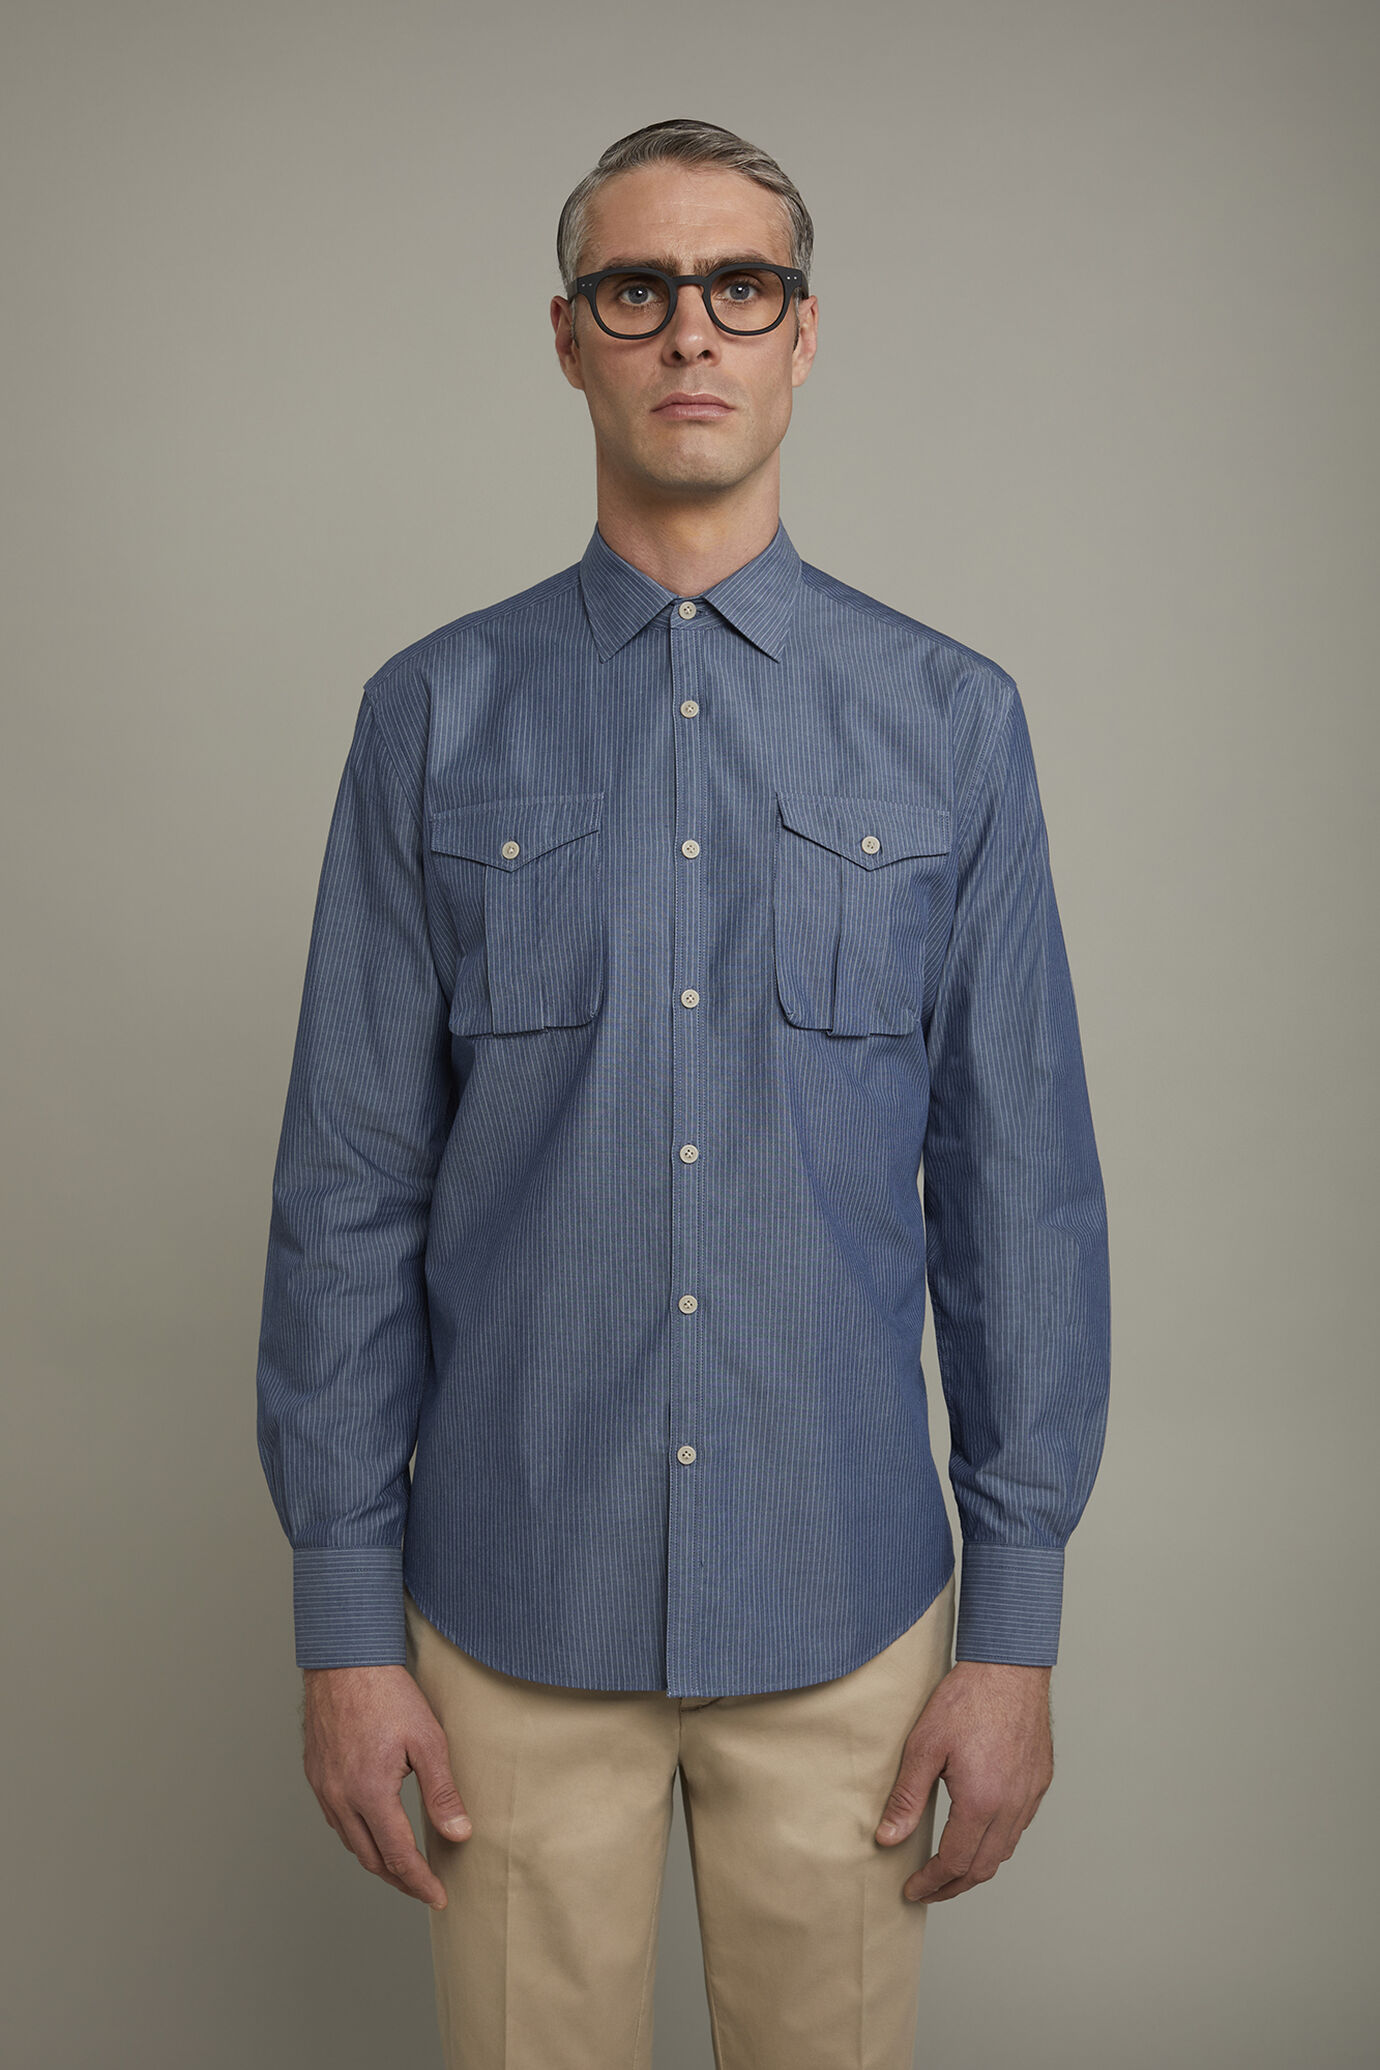 Men’s casual shirt with classic collar 100% cotton pinstriped fabric in denim comfort fit image number 2